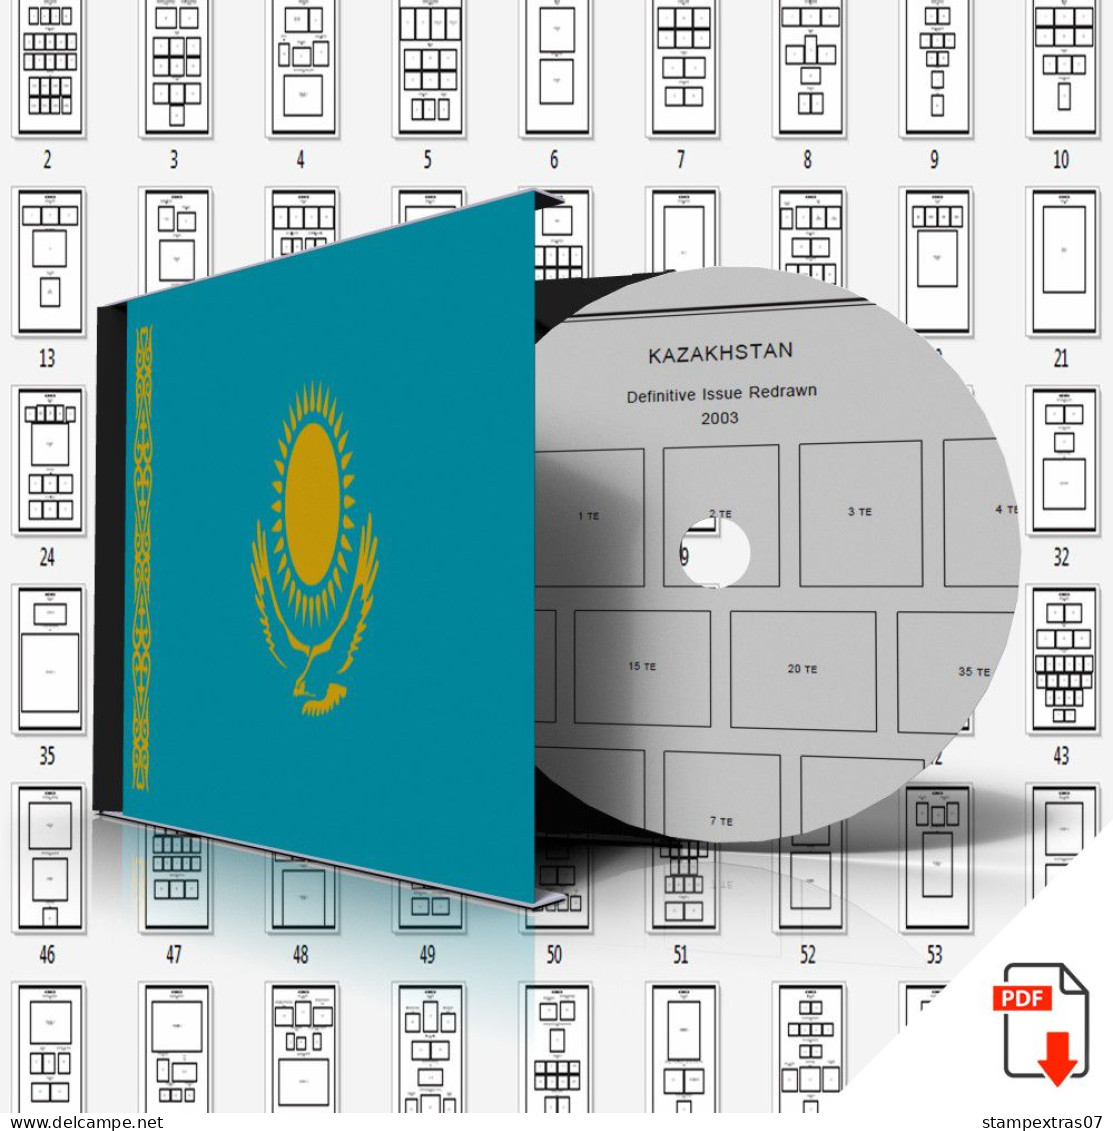 KAZAKHSTAN STAMP ALBUM PAGES 1992-2011 (82 Pages) - English